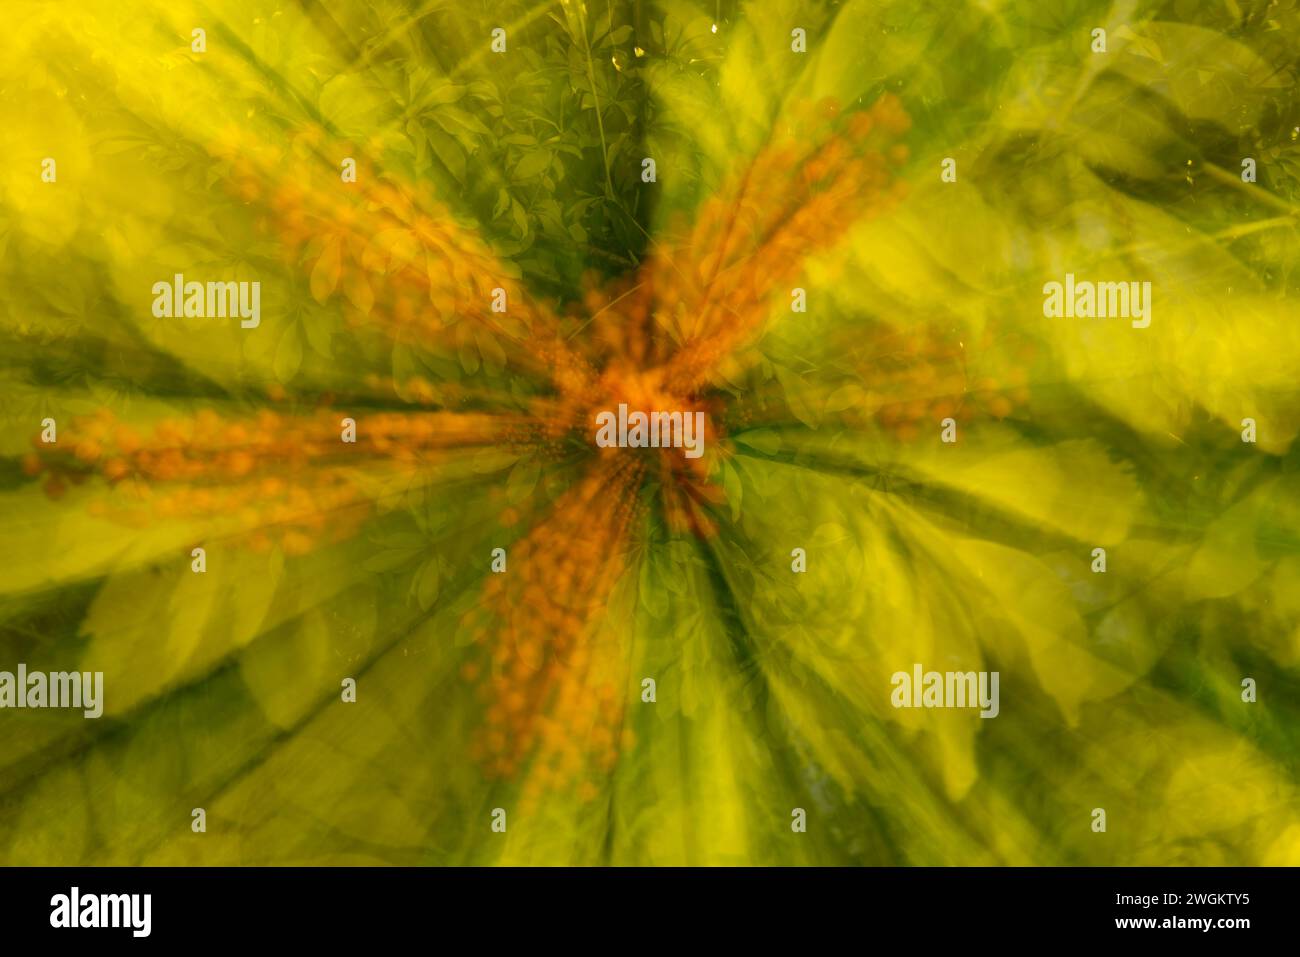 Abstract picture of a green and orange plant photographed with intentional camera movement by zooming out. Stock Photo